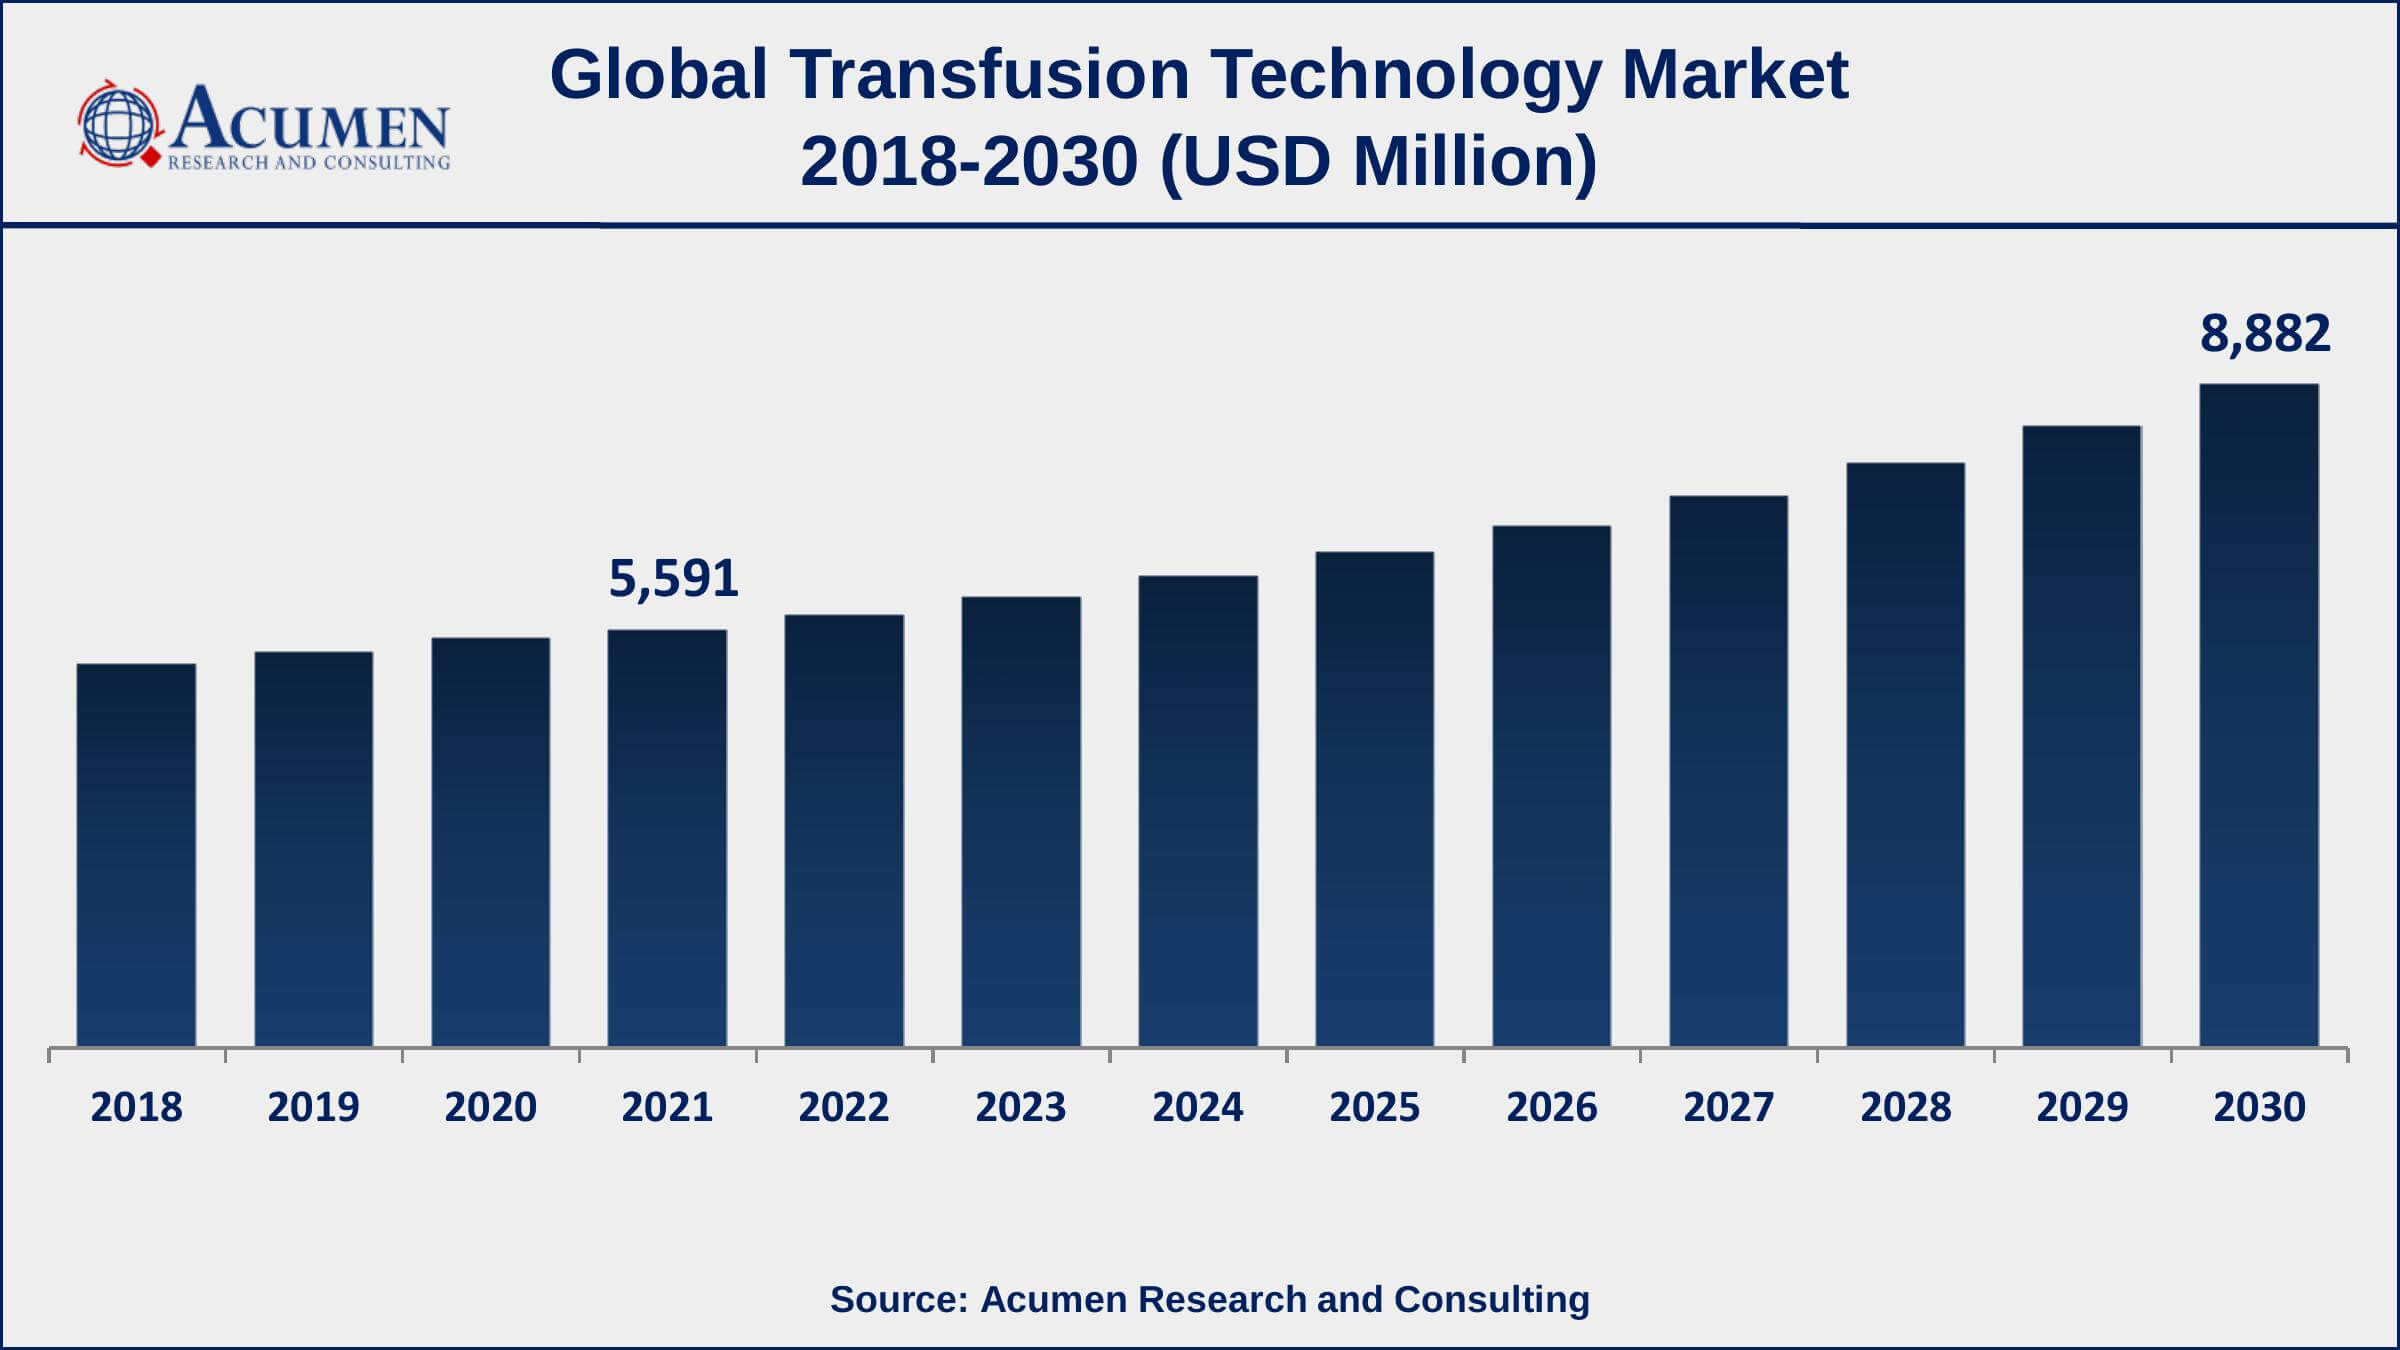 Asia-Pacific transfusion technology market growth will observe highest CAGR from 2022 to 2030